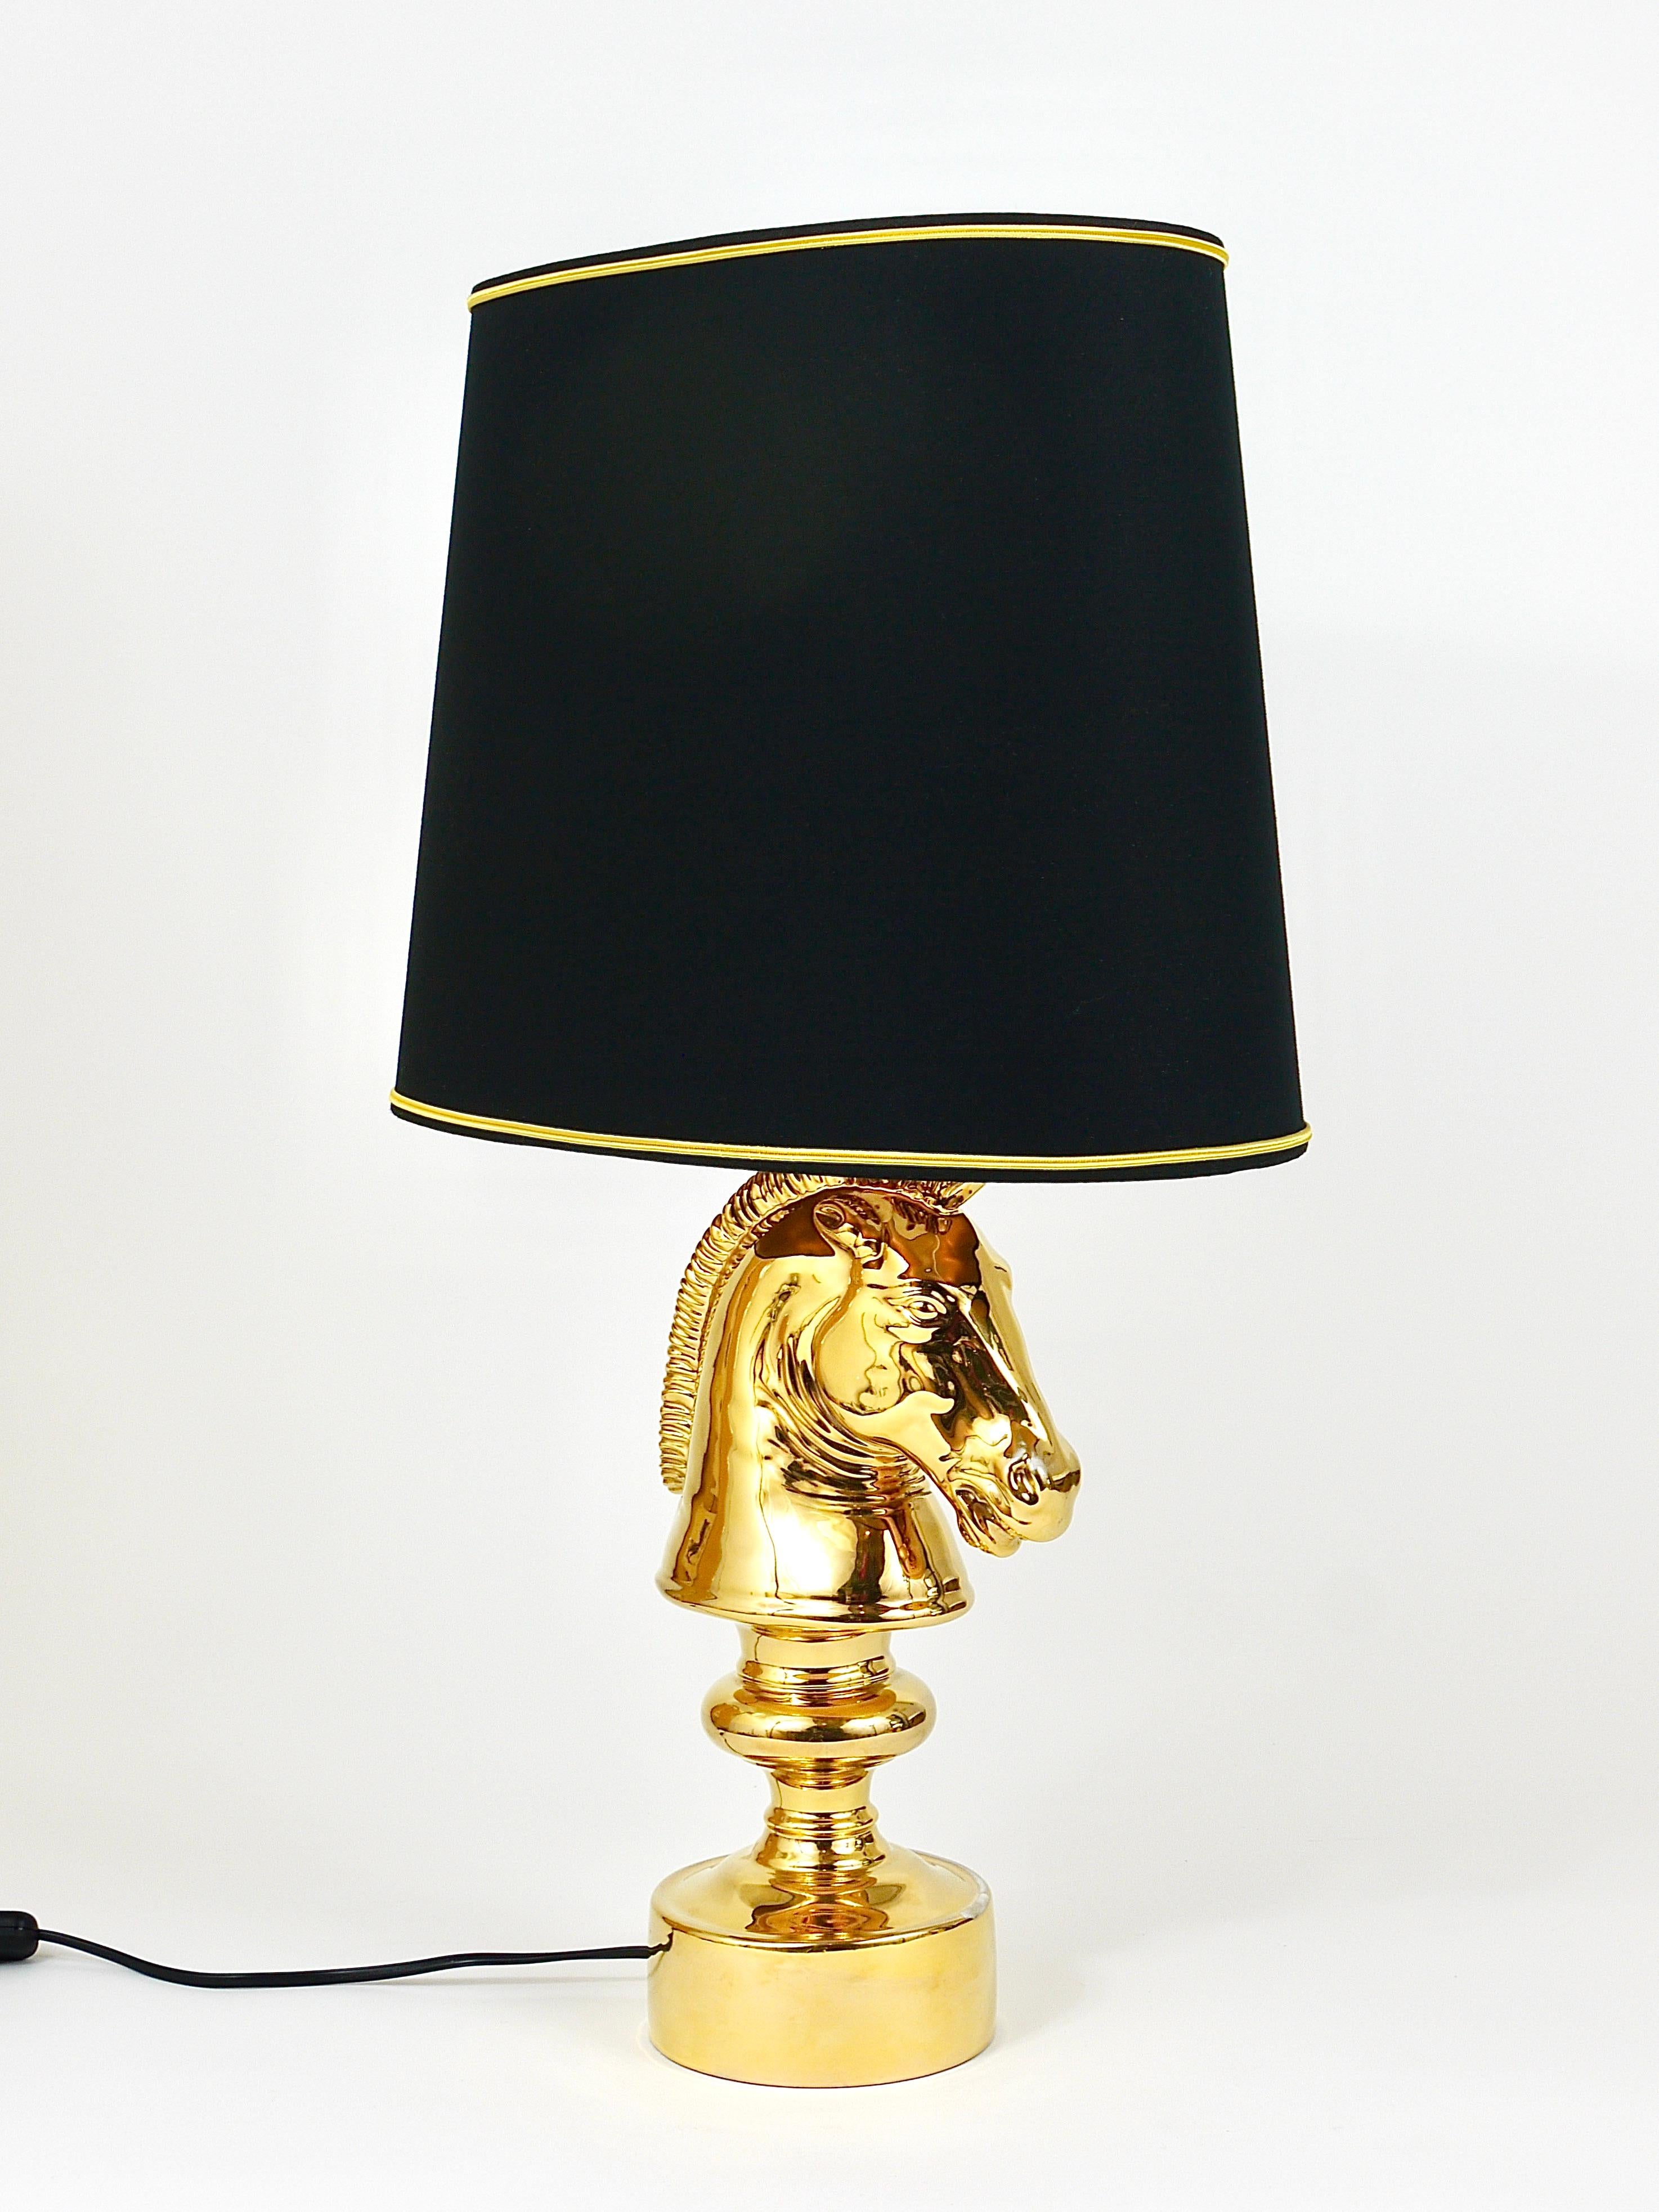 Golden Hollywood Regency Horse Sculpture Table or Side Lamp, Italy, 1970s For Sale 3